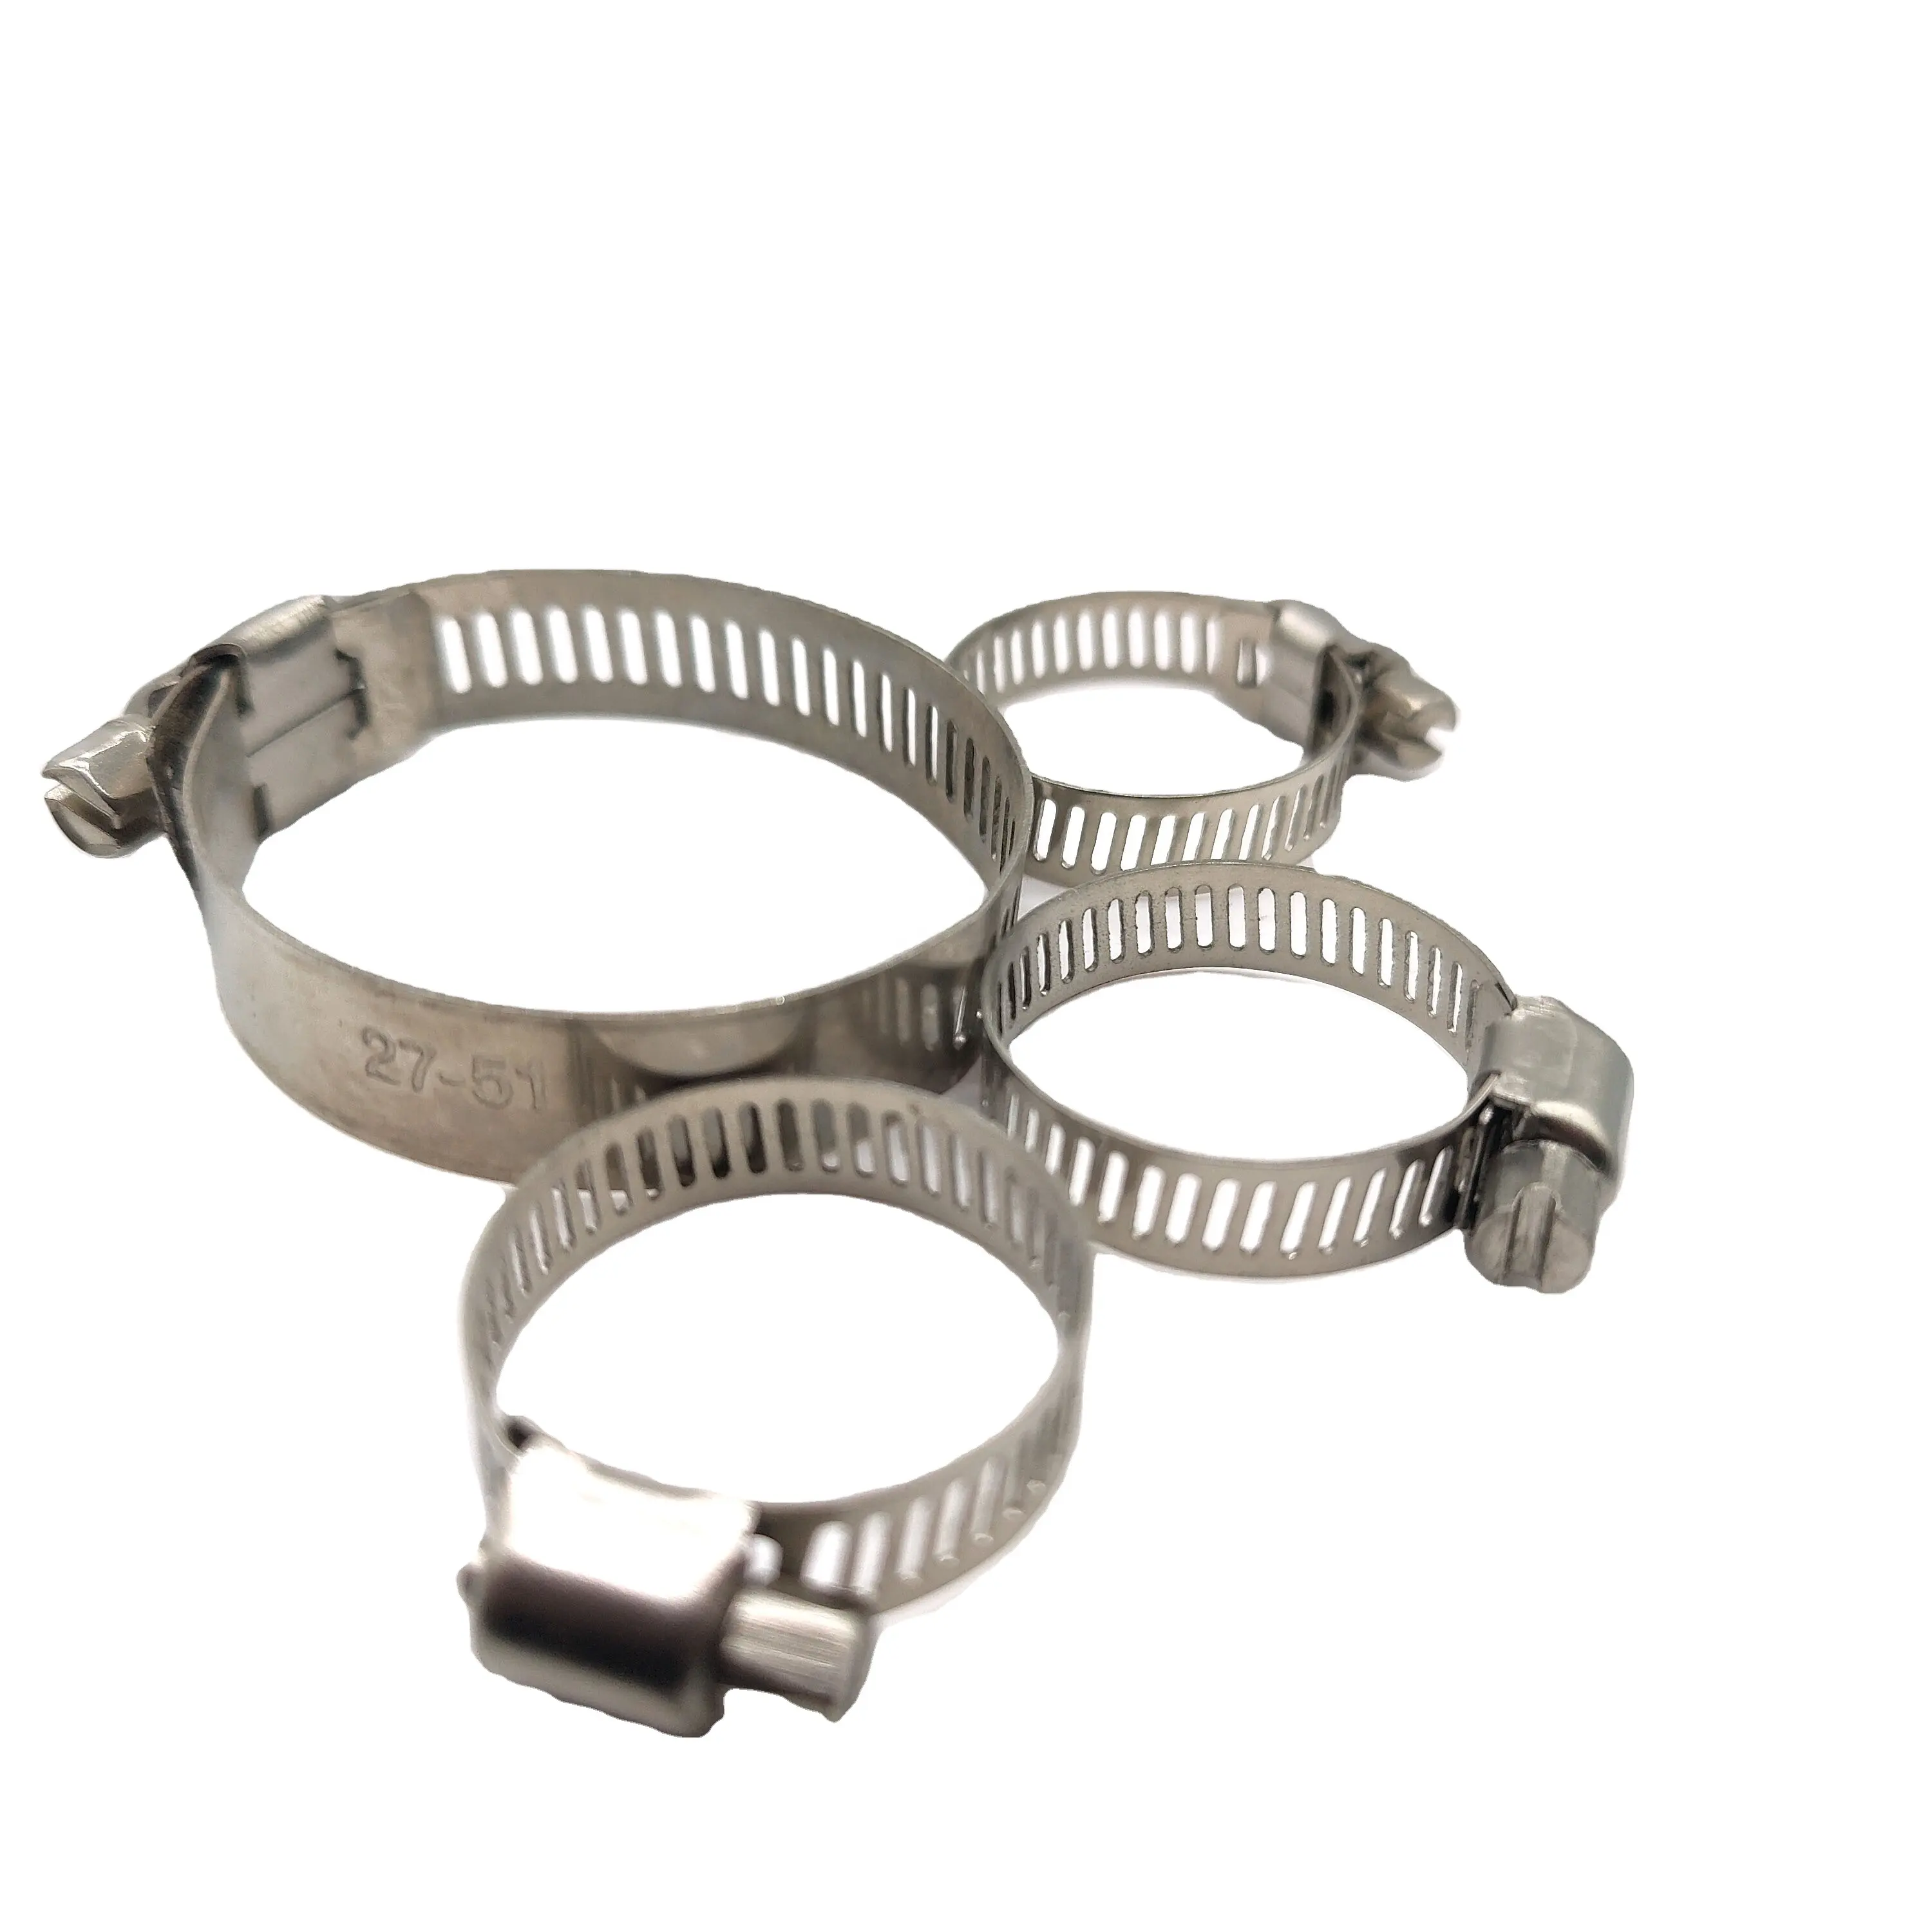 DIN 3017 Gear Drive Hose Clamp 1/4 316 Stainless Steel Heavy Duty Hose pipe Clamps JB /T 8870 China fasteners Factory